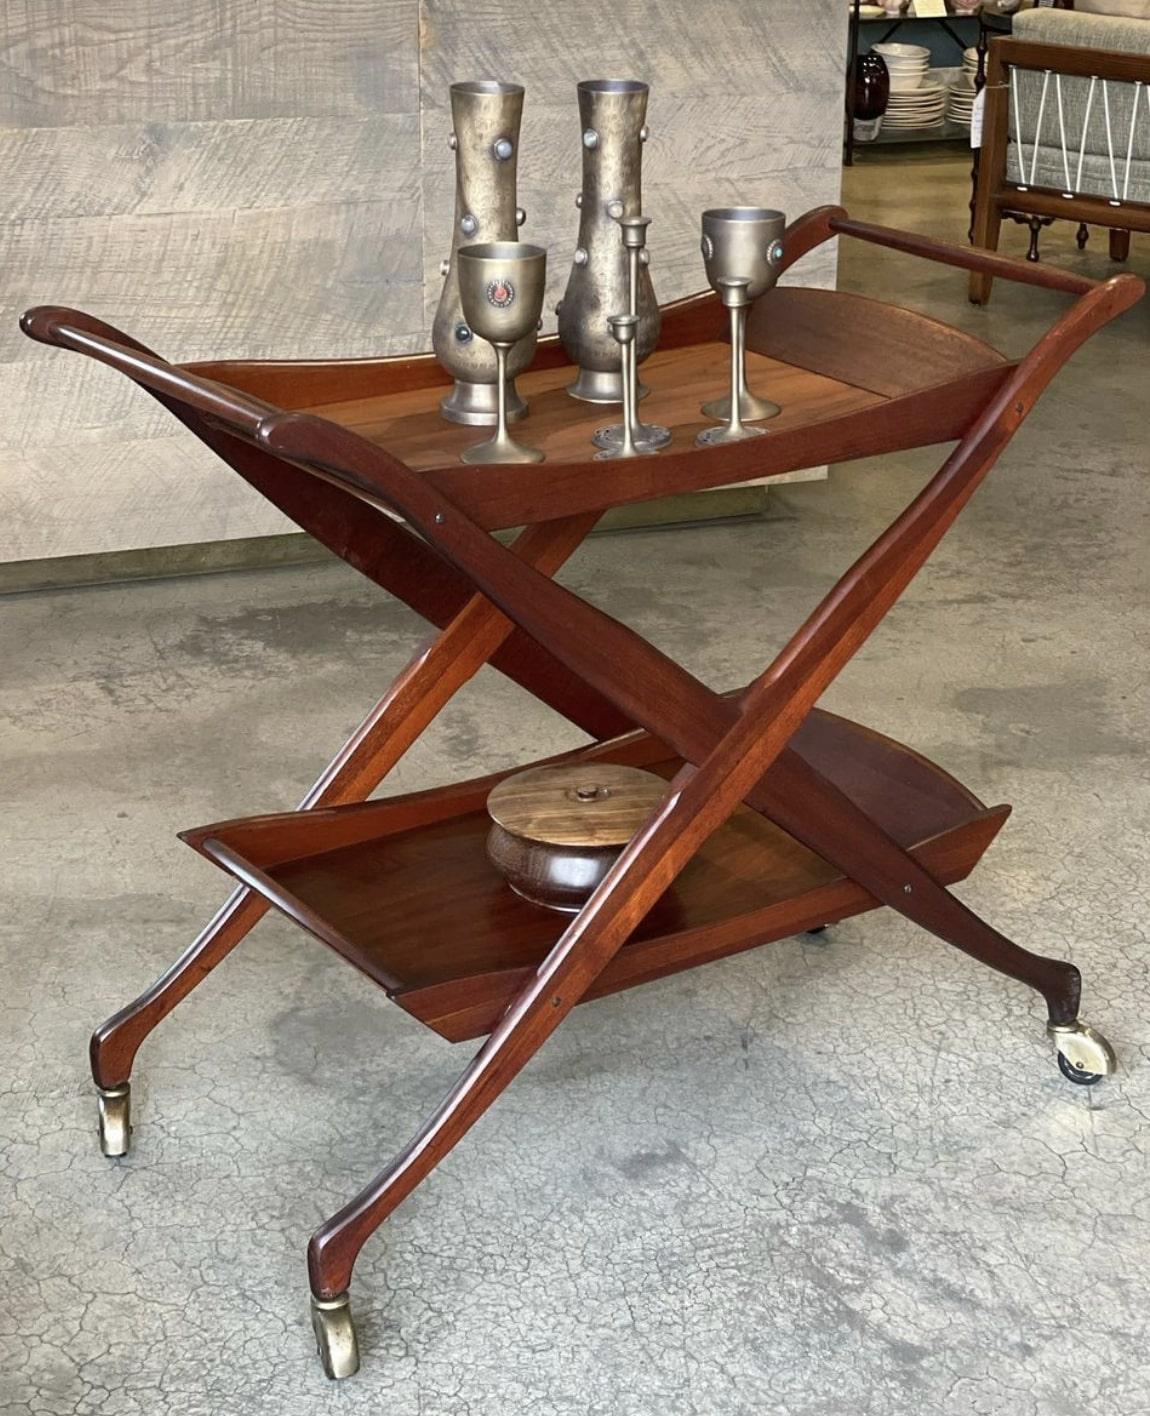 YOUR DRINK IS SERVED! 🍸

Serve your cocktails off this handsome Modernist rolling Walnut bar/tea cart with its striking 'X' frame design. It has two trays with raised edges, sexy sleek legs and brass casters.

It measures 37